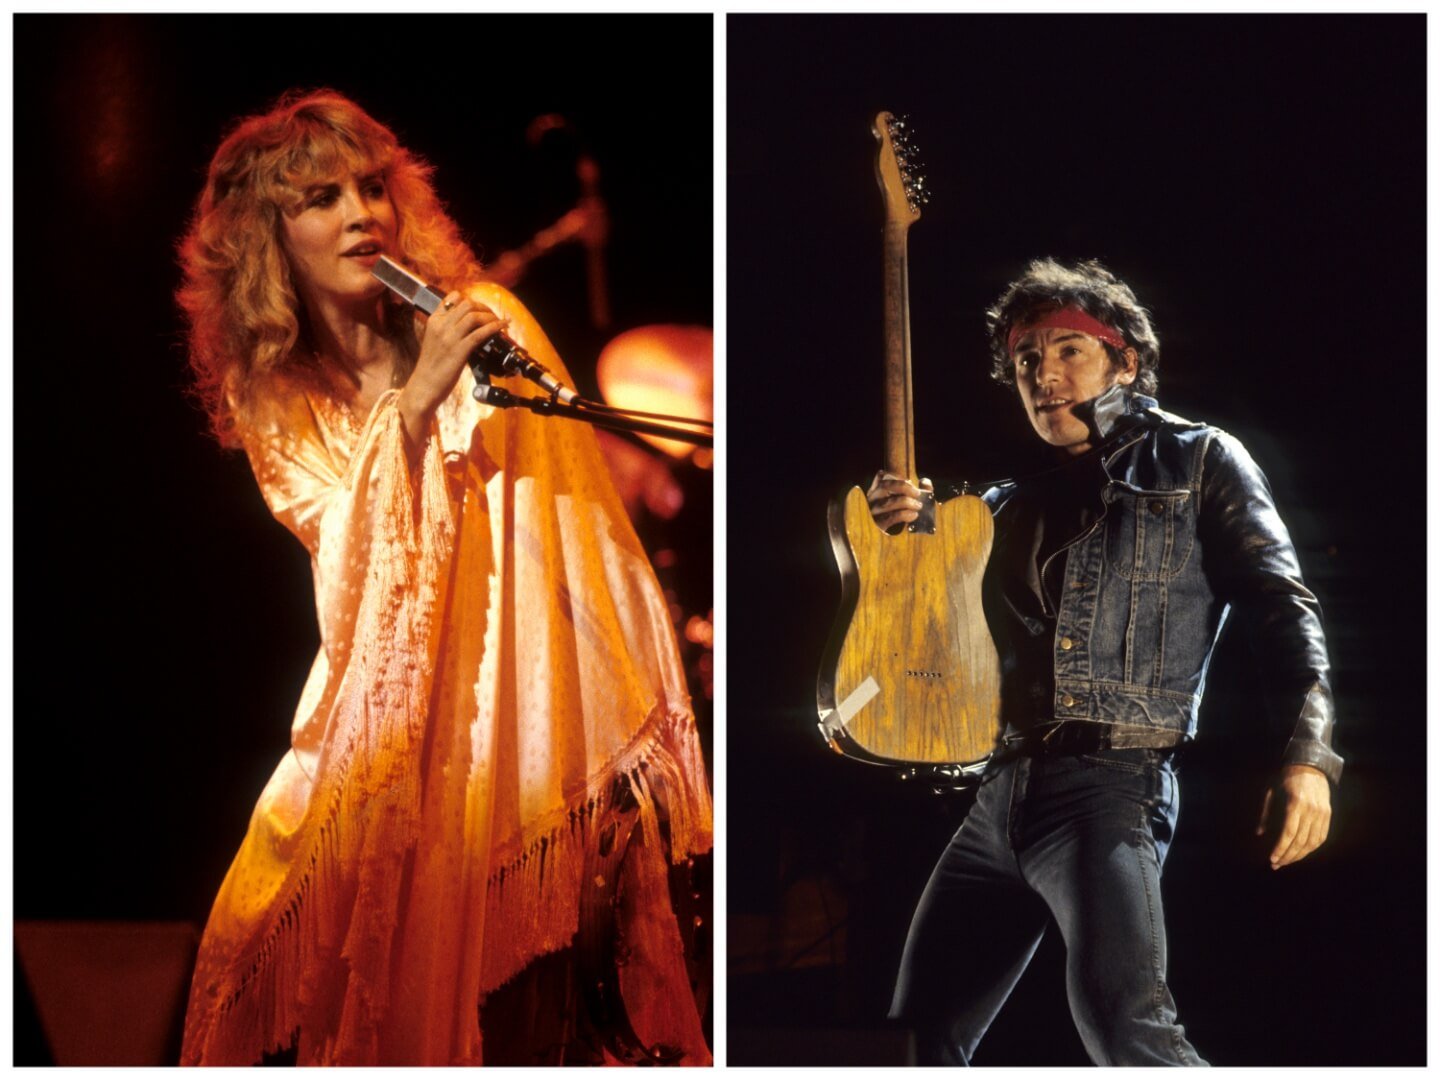 Stevie Nicks wears a shawl and sings into a microphone. Bruce Springsteen wears a denim jacket and red bandana around his head and holds a guitar.